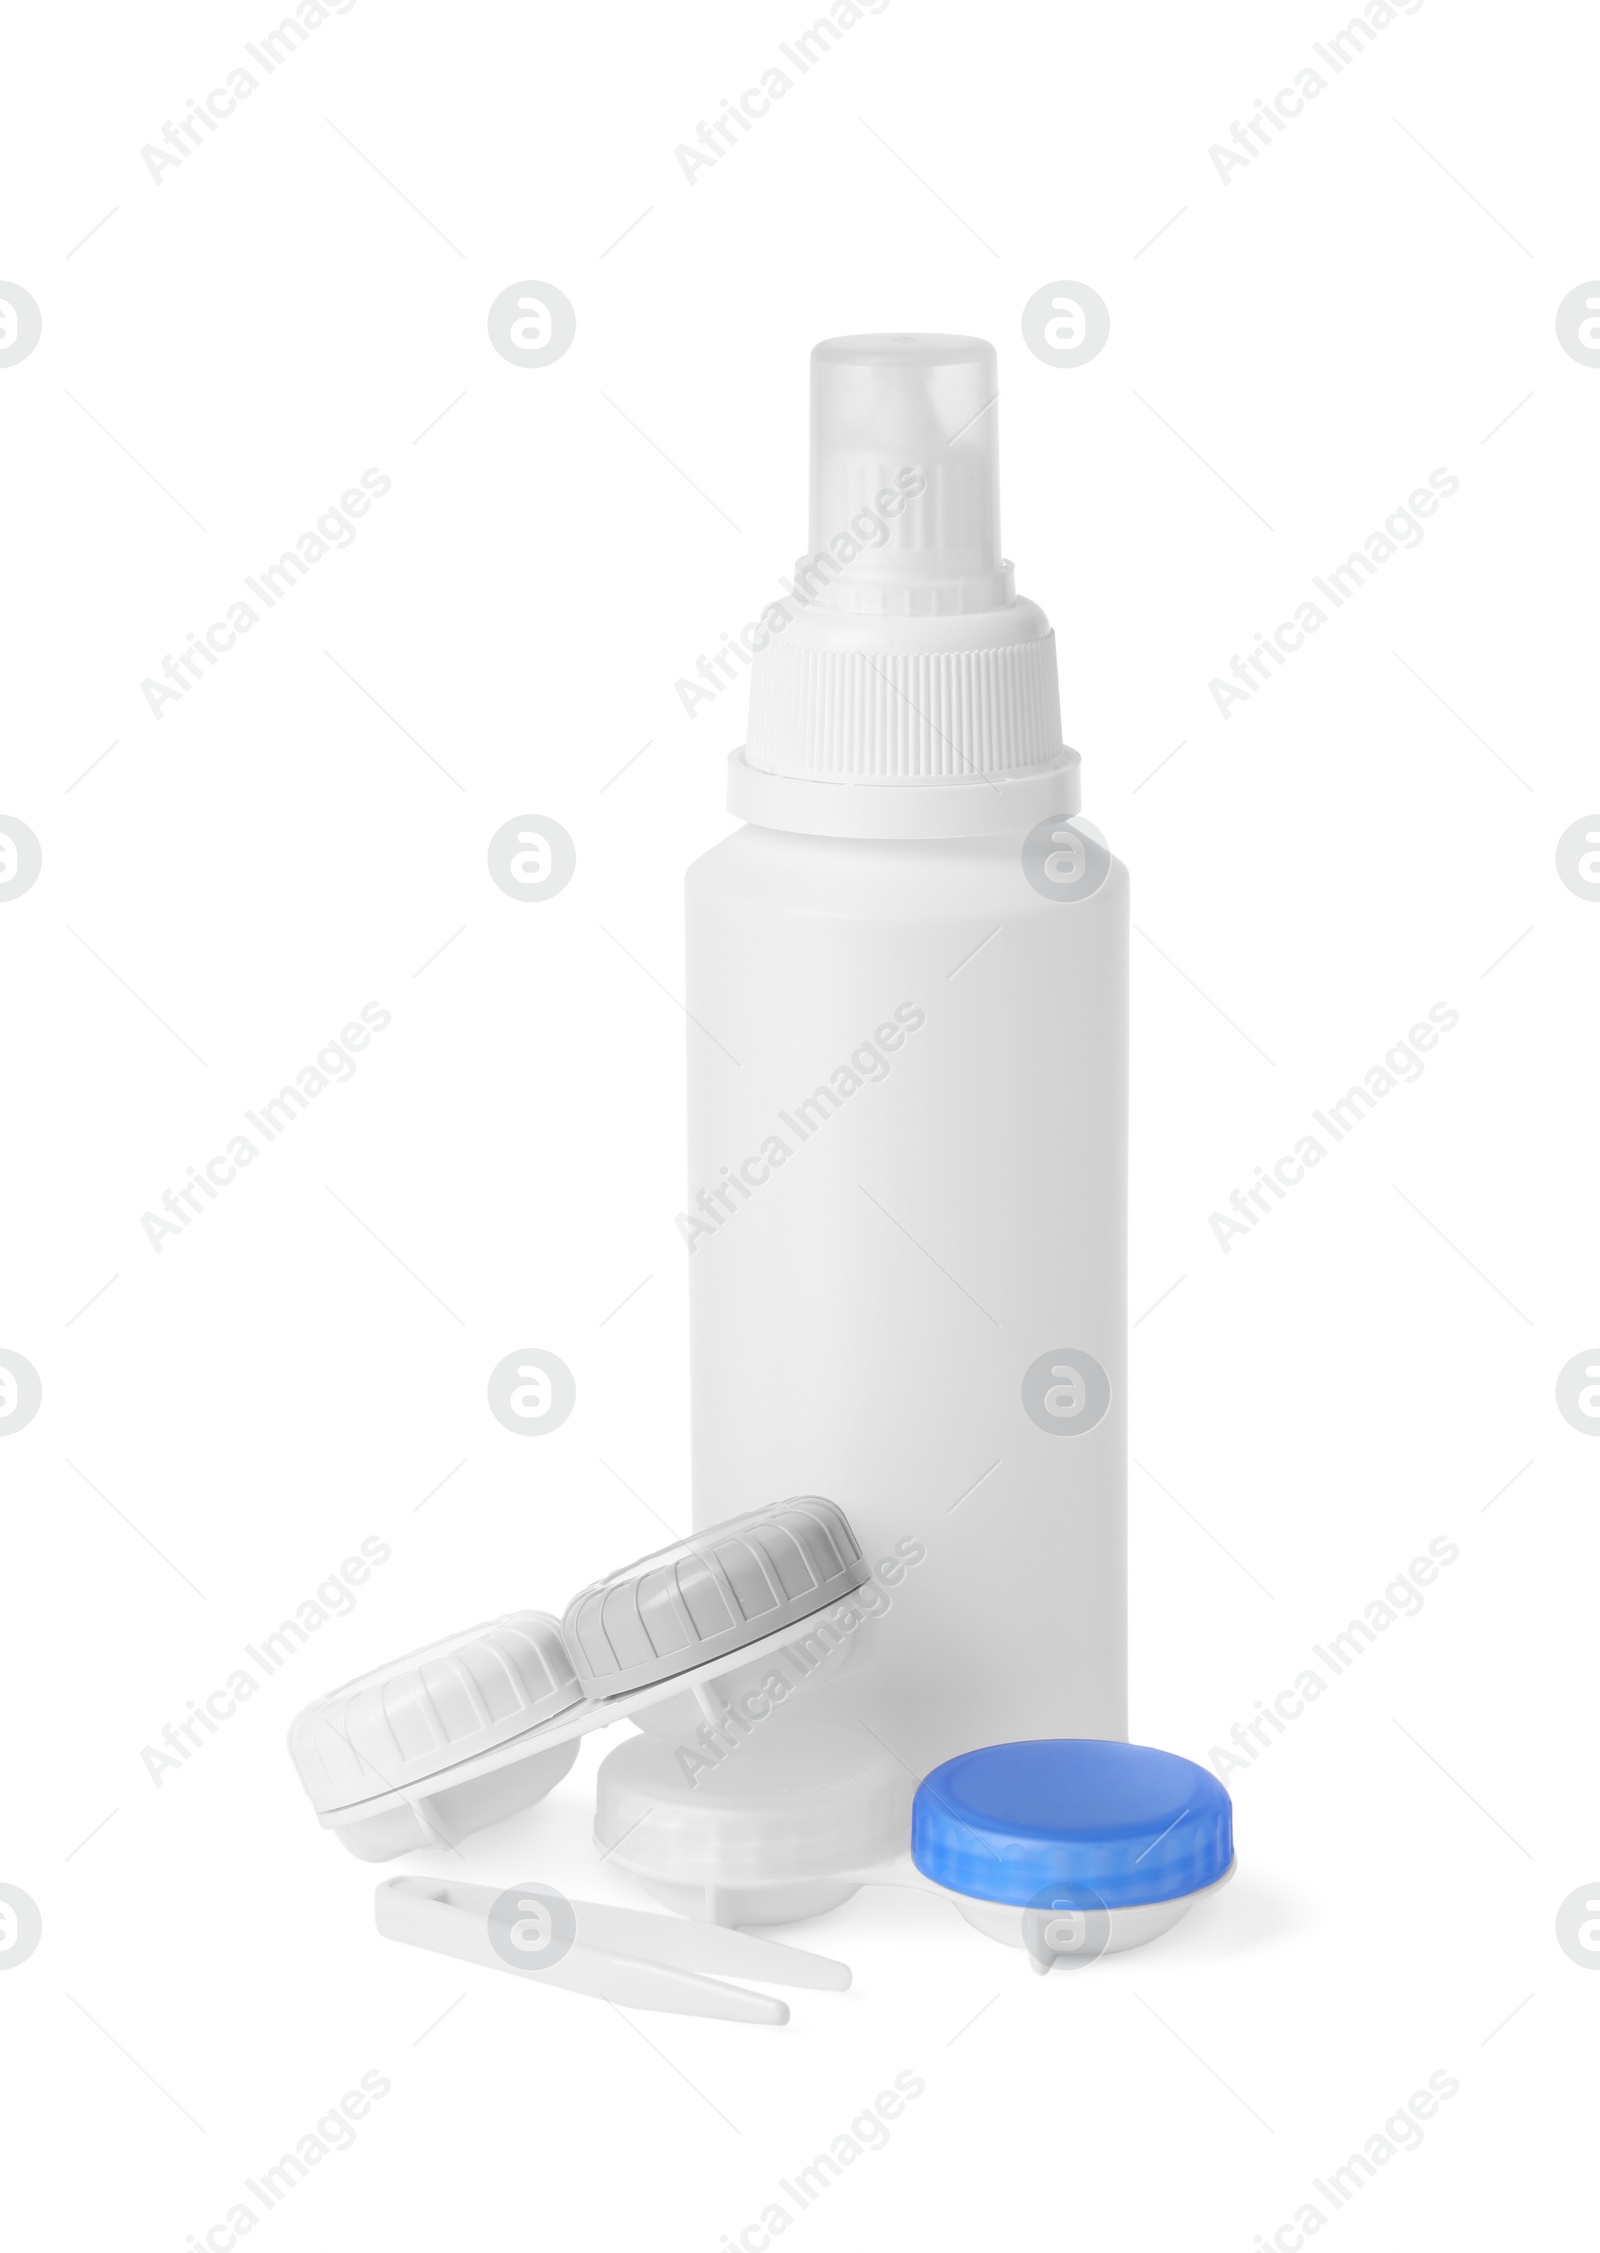 Photo of Cases with color contact lenses, bottle of cosmetic product and tweezers isolated on white